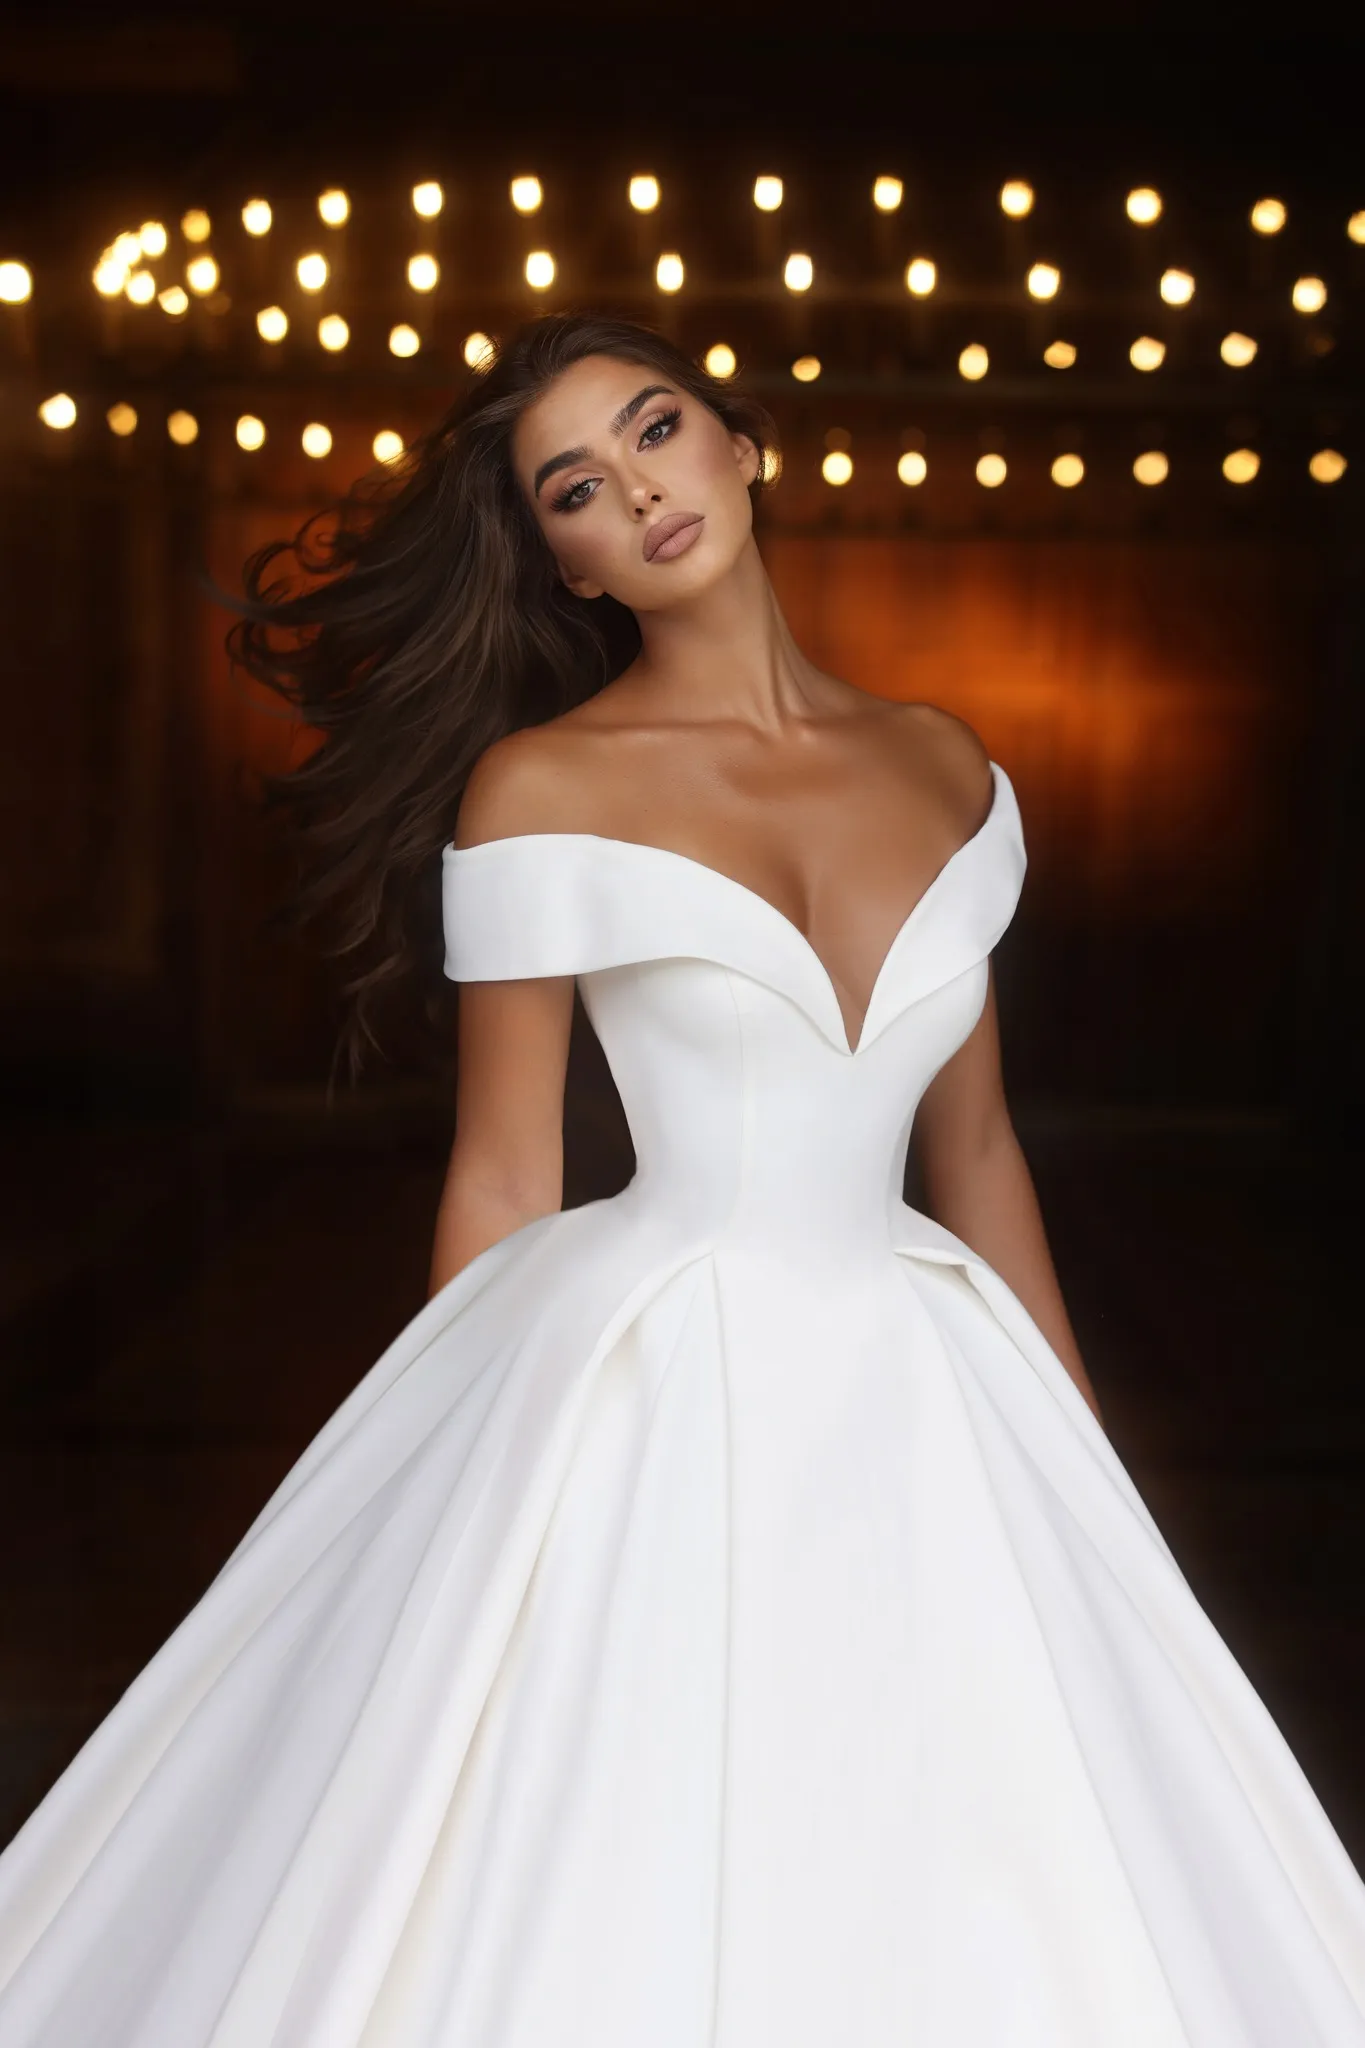 The Sales Rack-Bohemian Satin Bridal Dress With Bow Back